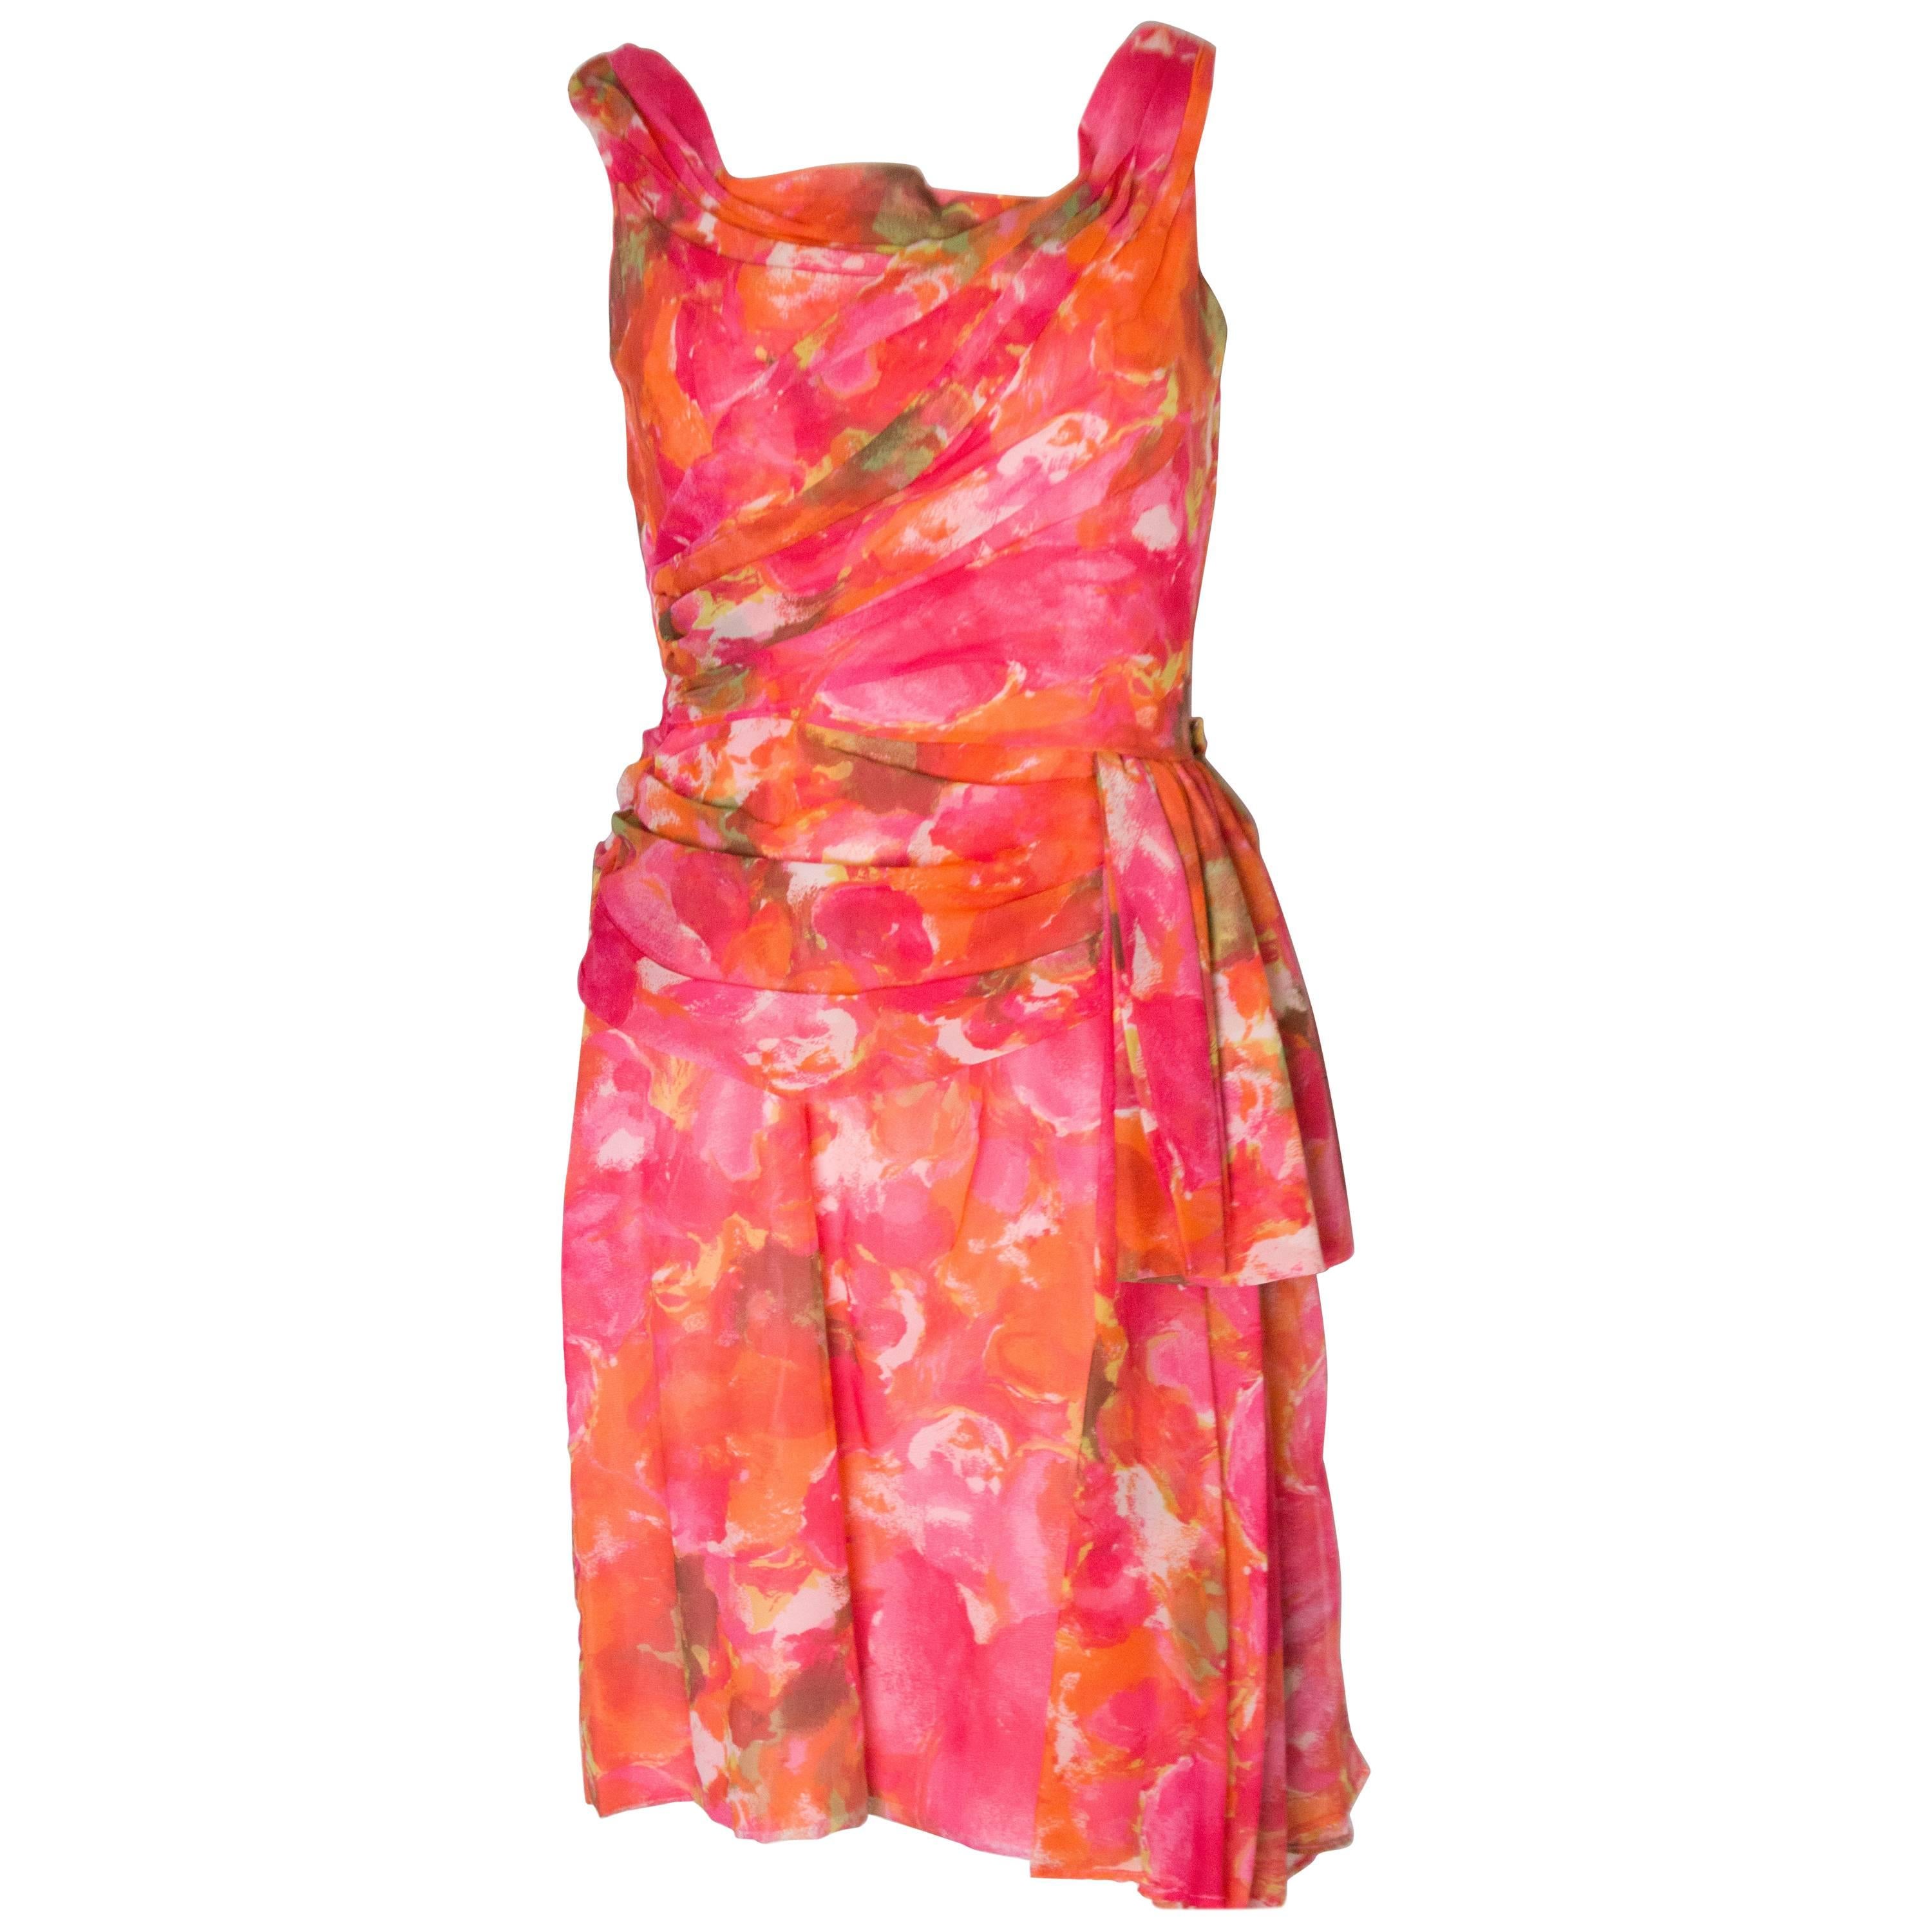 A Vintage 1960s floral printed Cocktail Dress by London Town For Sale ...